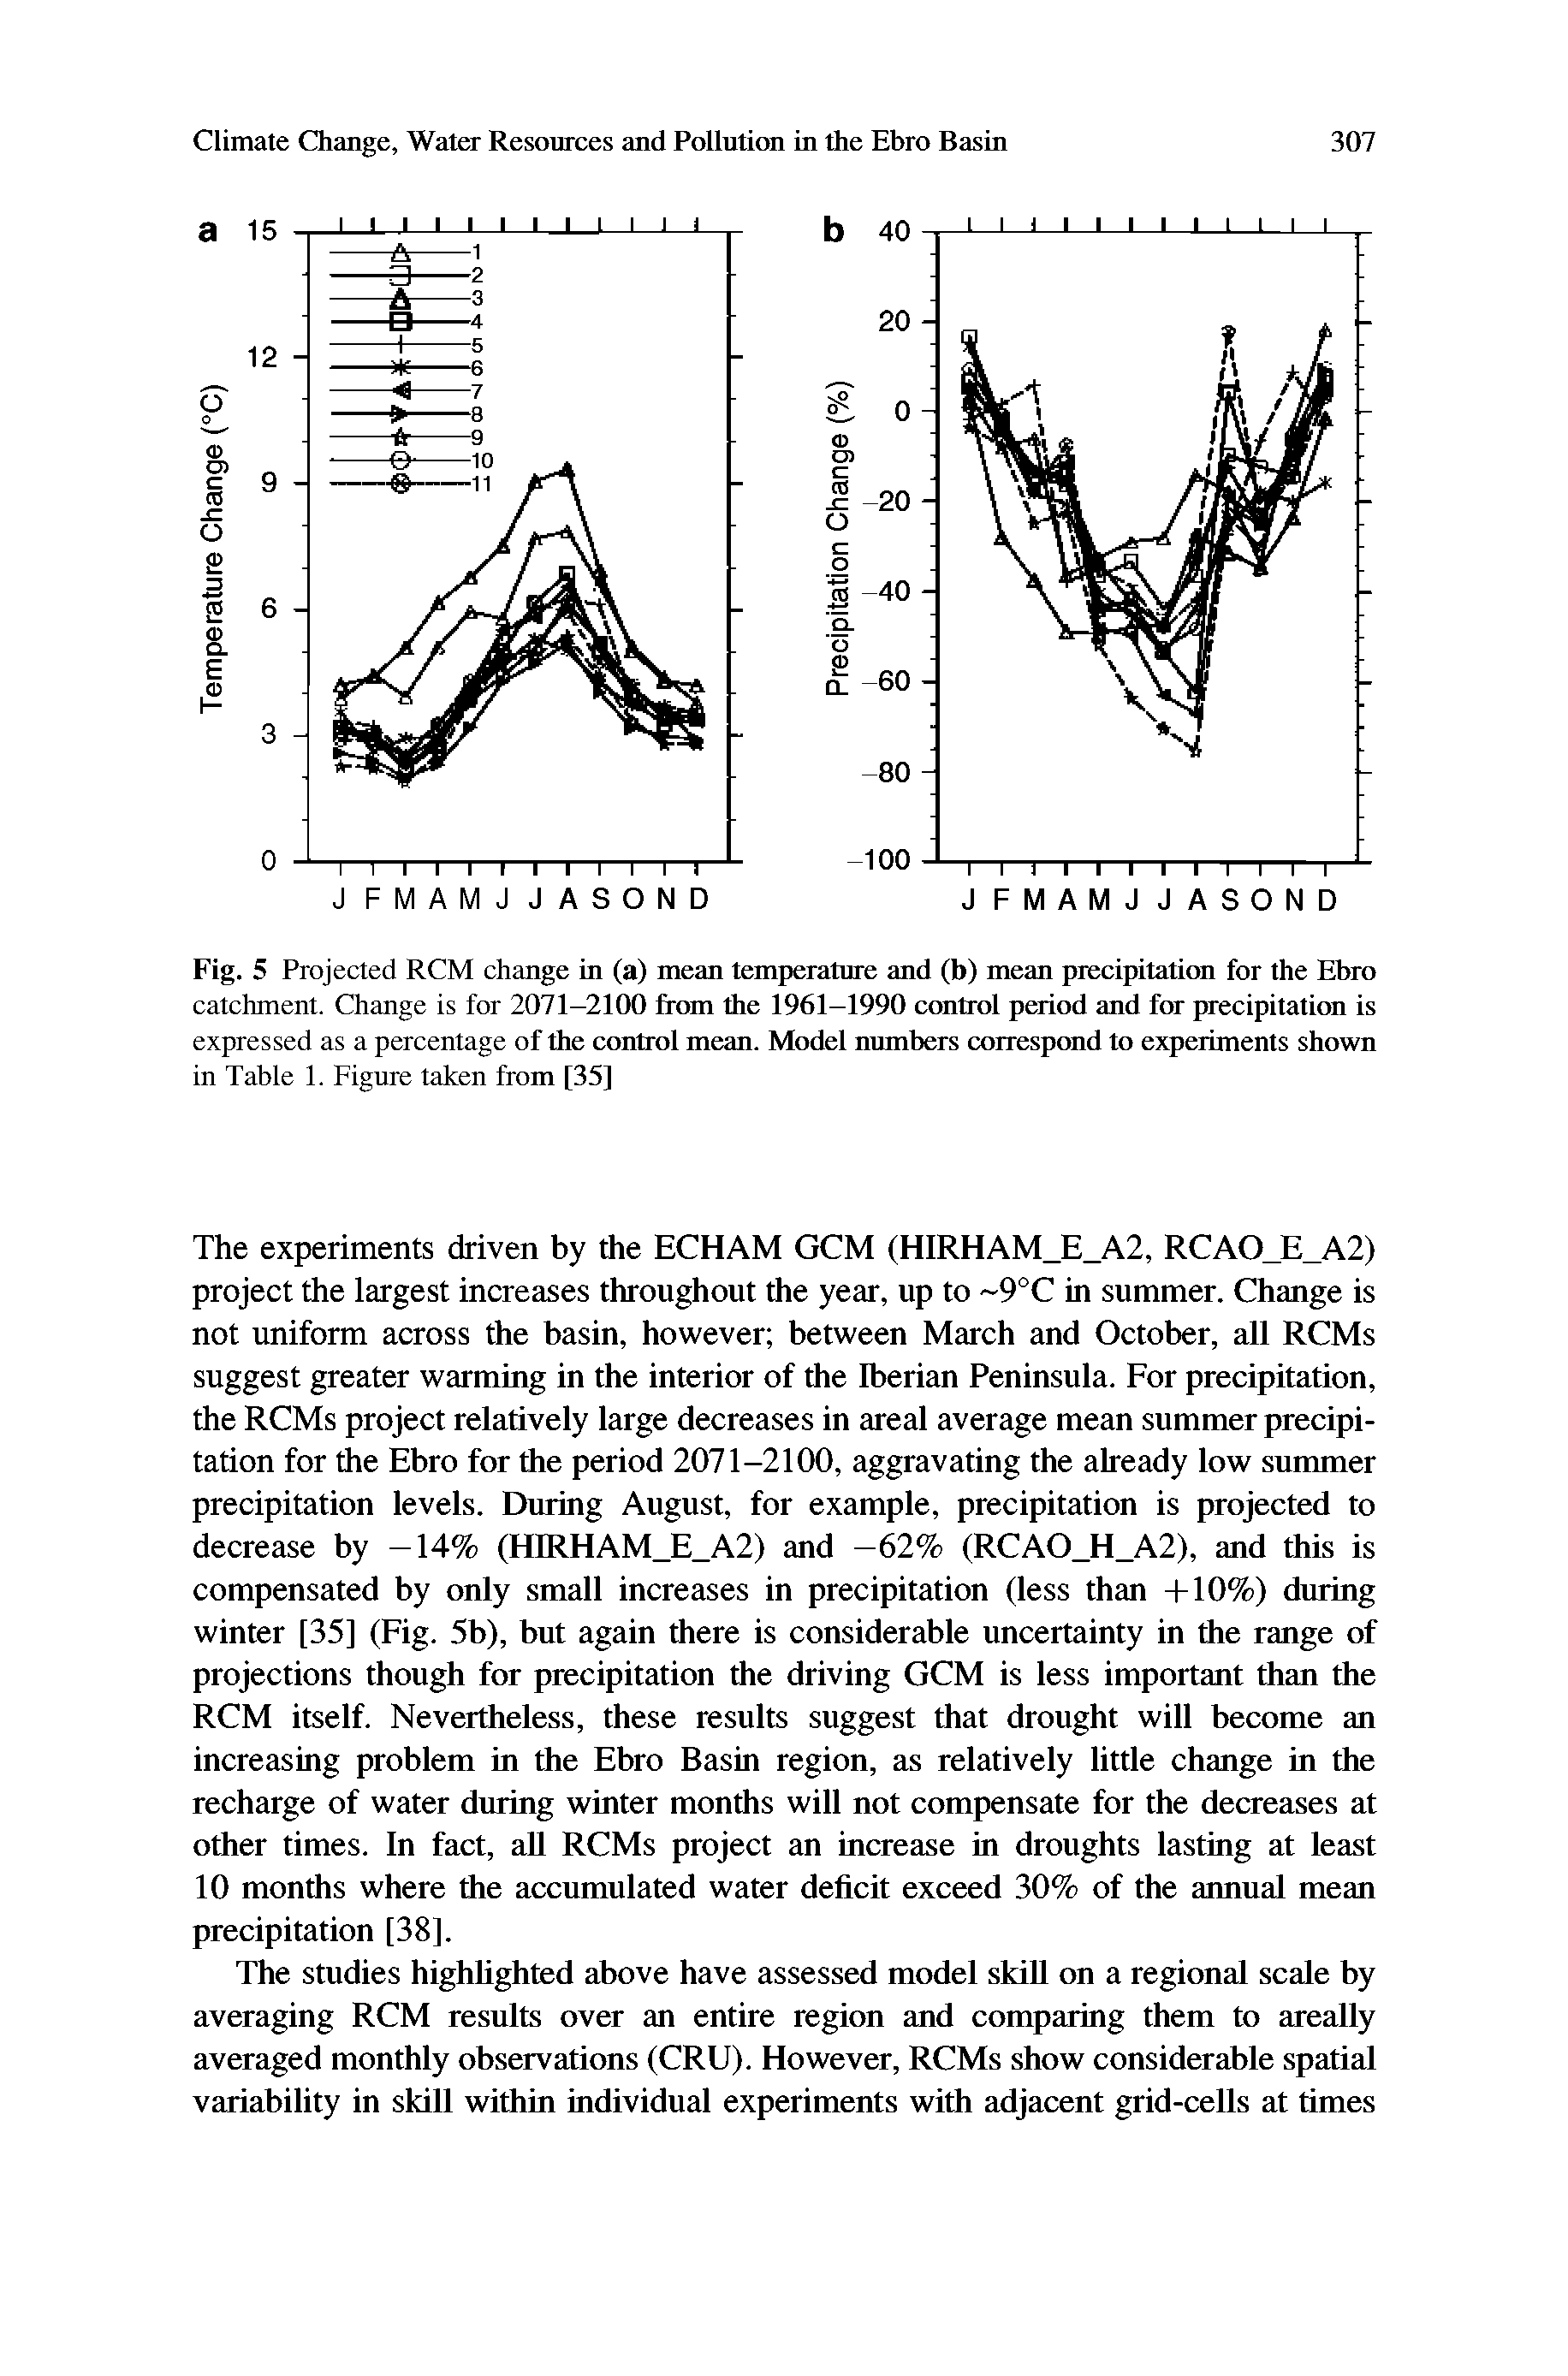 Fig. 5 Projected RCM change in (a) mean temperature and (b) mean precipitation for the Ebro catchment. Change is for 2071-2100 from the 1961-1990 control period and for precipitation is expressed as a percentage of the control mean. Model numbers correspond to experiments shown in Table 1. Figure taken from [35]...